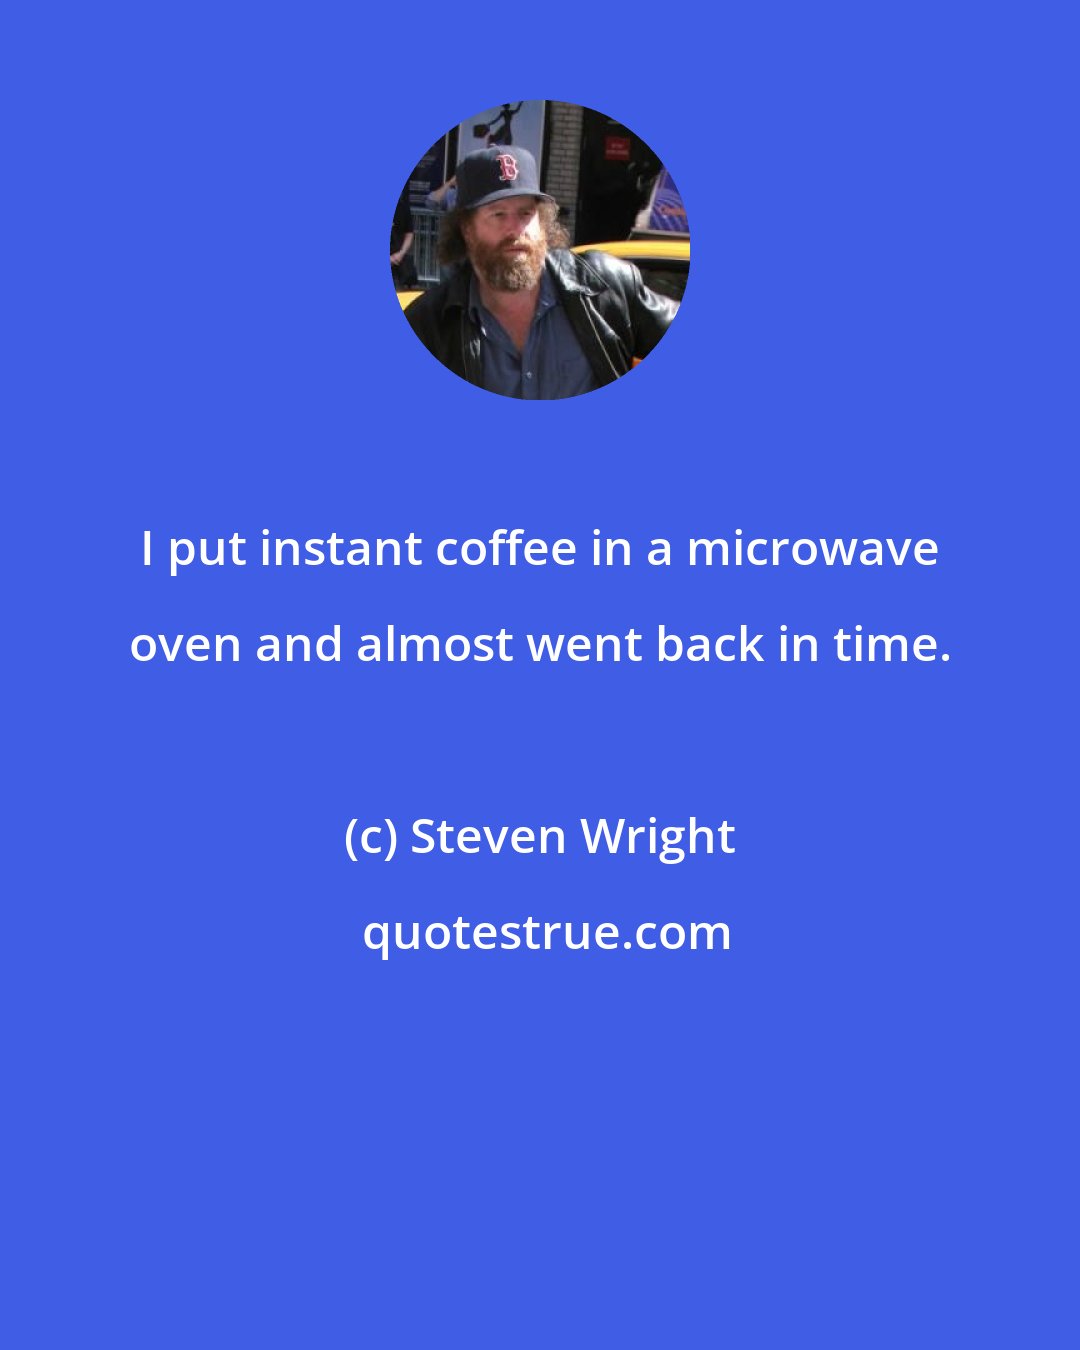 Steven Wright: I put instant coffee in a microwave oven and almost went back in time.